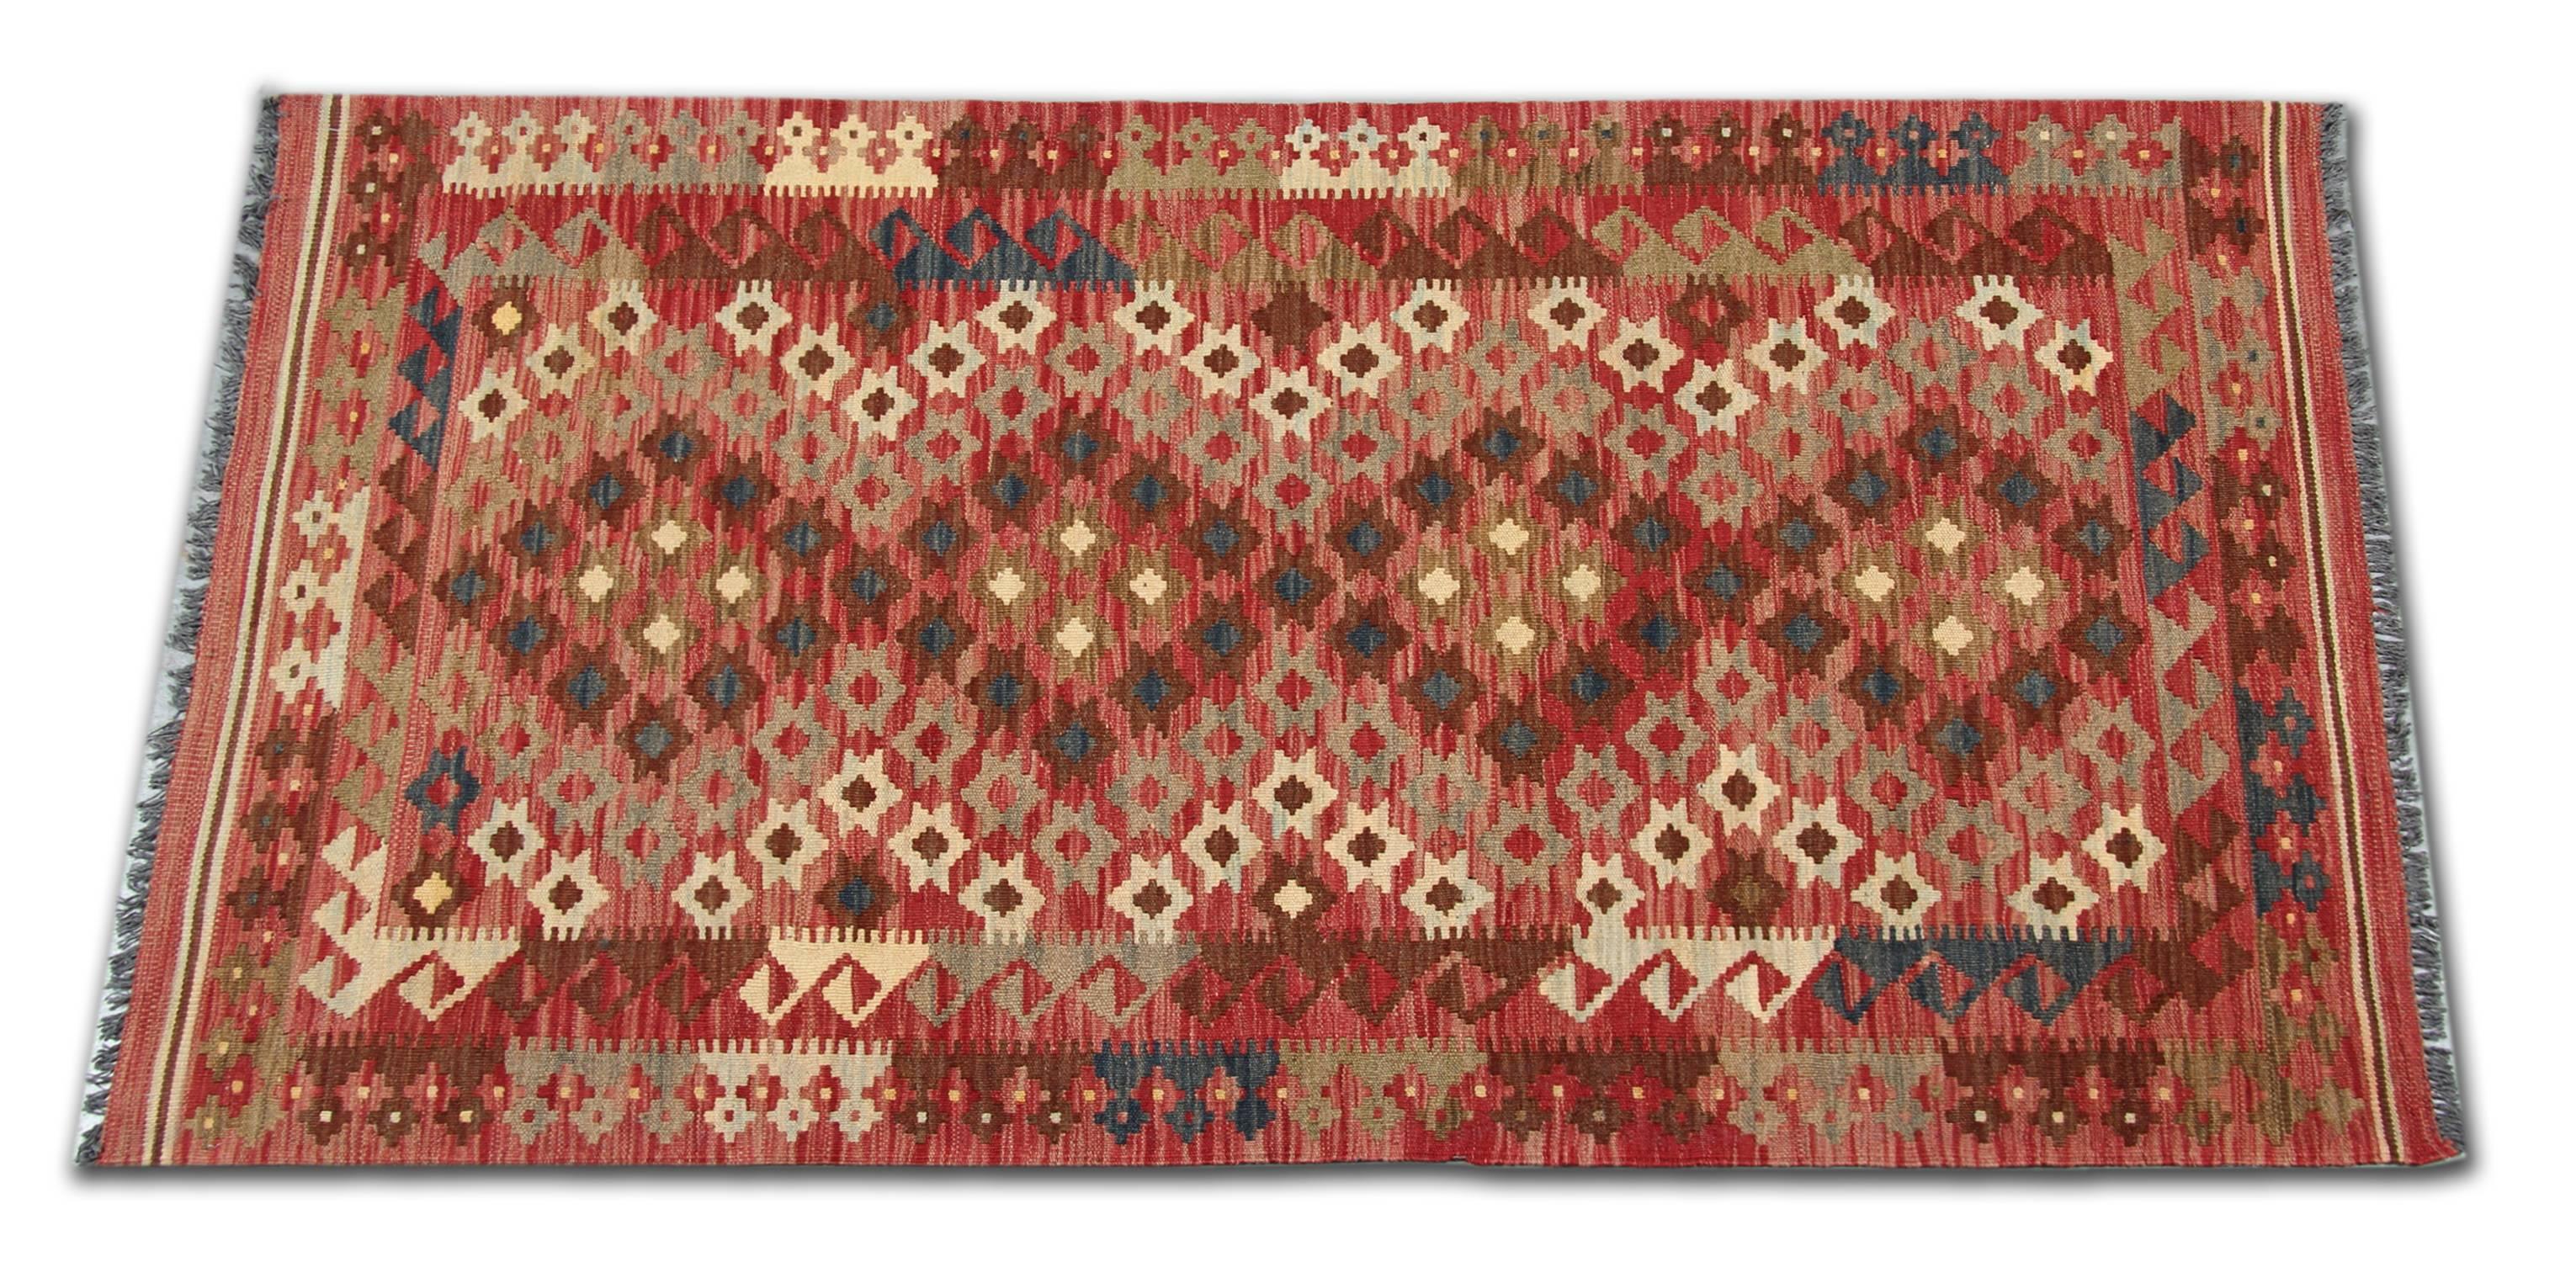 This Kilim rug is handmade in Afghanistan by Uzbek and Turkman tribes. The main materials are wool and cotton, locally sourced. The dyes are organic. The quality of the materials enhances the value of the carpet and its hard wearing features. The